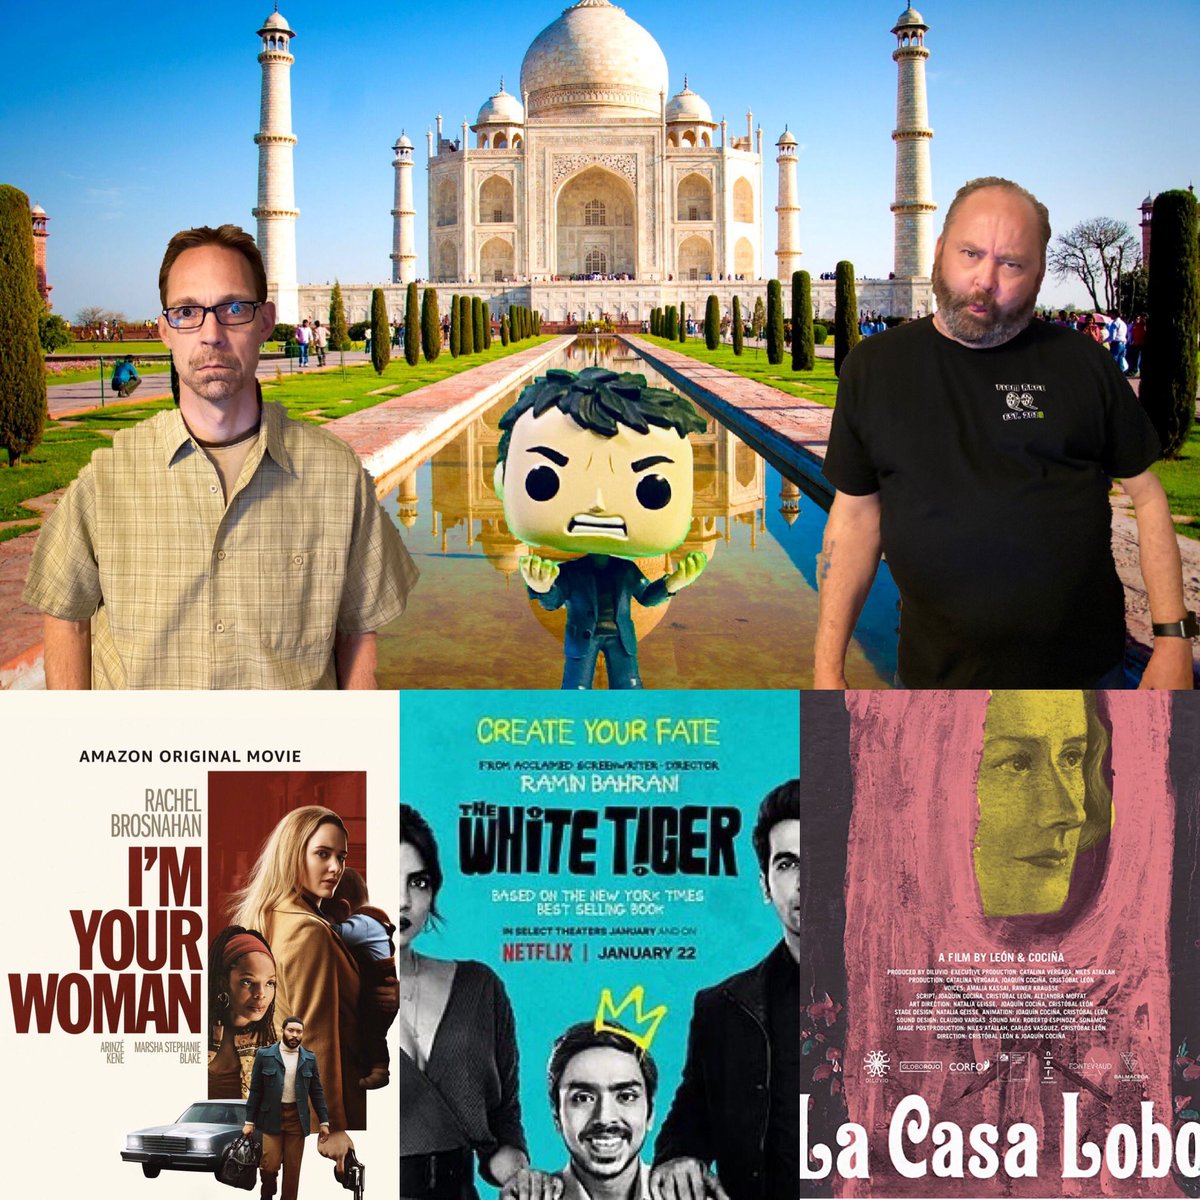 Episode 74 is #streaming everywhere you #podcast 

👂👇
podcasts.apple.com/ca/podcast/fil…

👀👂👇
filmrageyyc.com

Review of
#TheWhiteTigerNetflix #thewolfhouse #imyourwoman 

🤩our 3000’s 
@hugosposts @CFeverDreams 

#indianfilm #germanfilm #chileanfilm #podcast #listen #USA